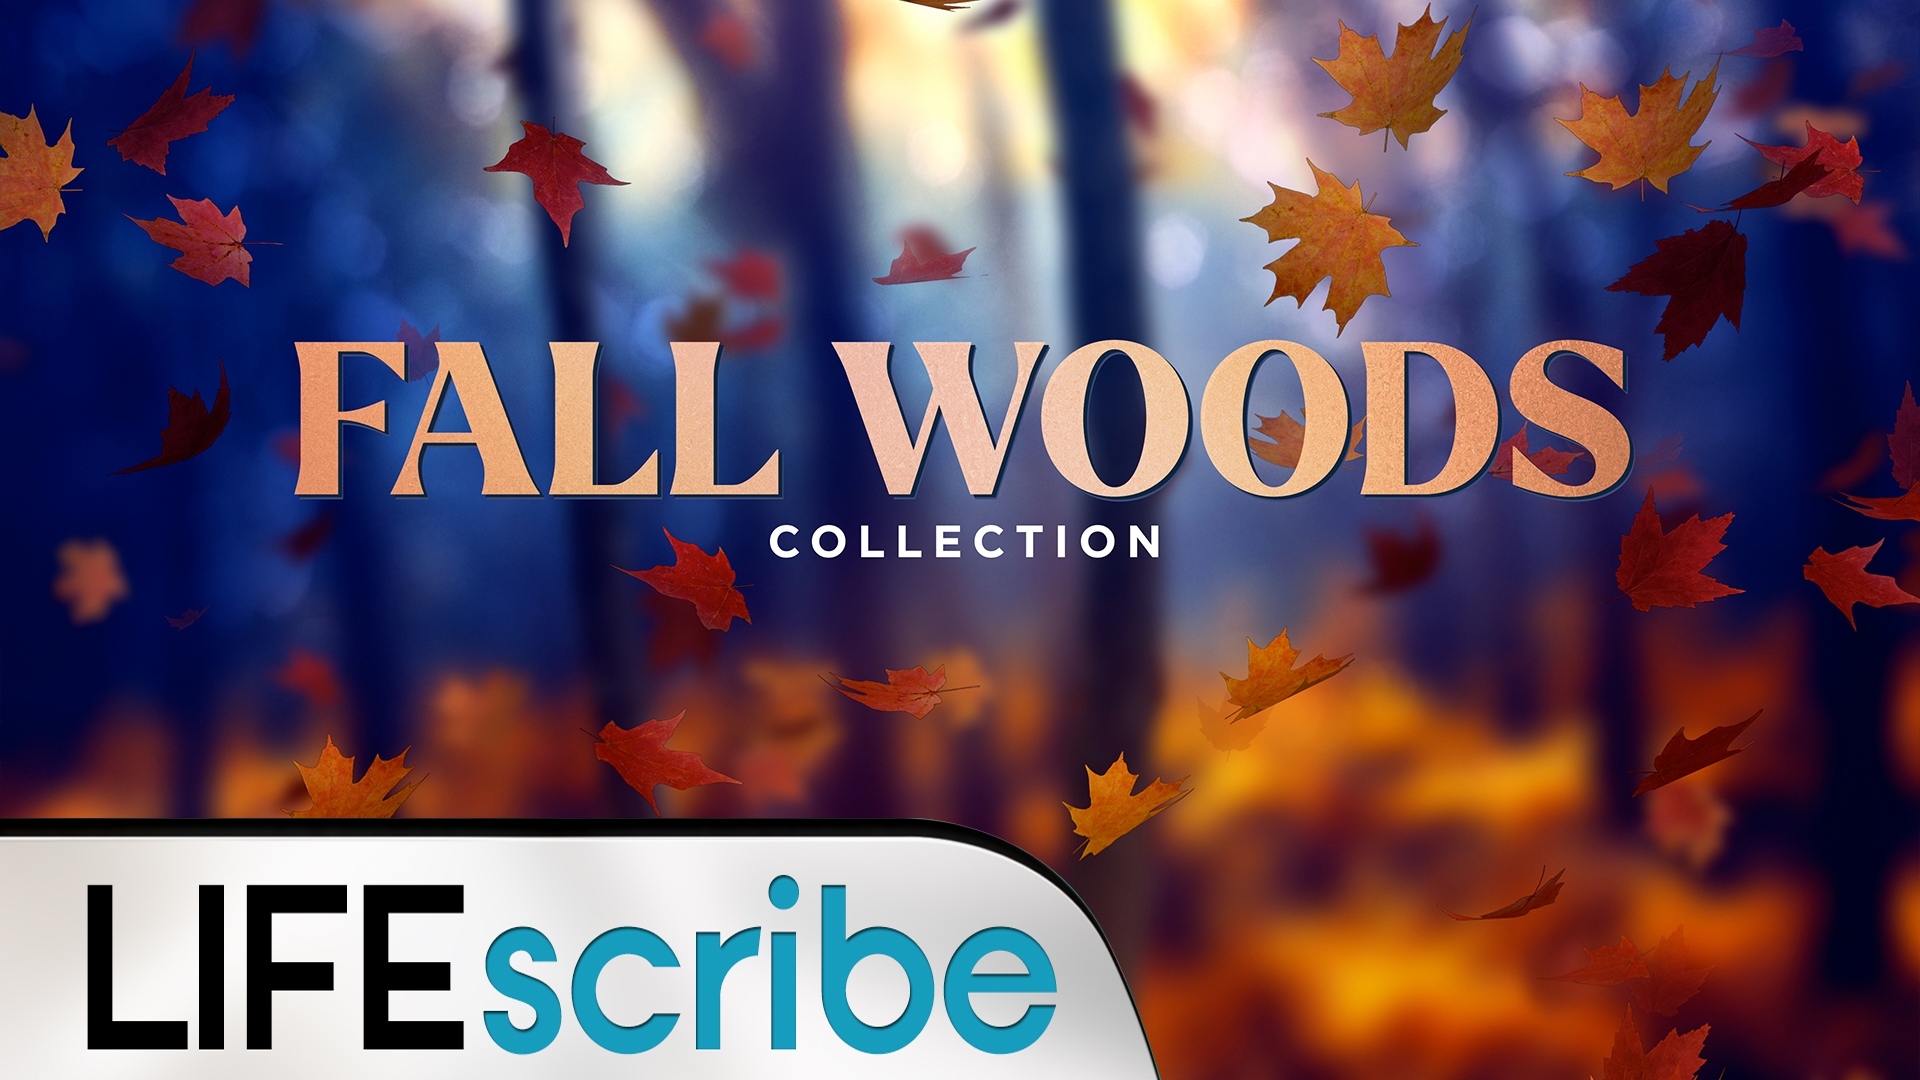 Fall Woods Collection